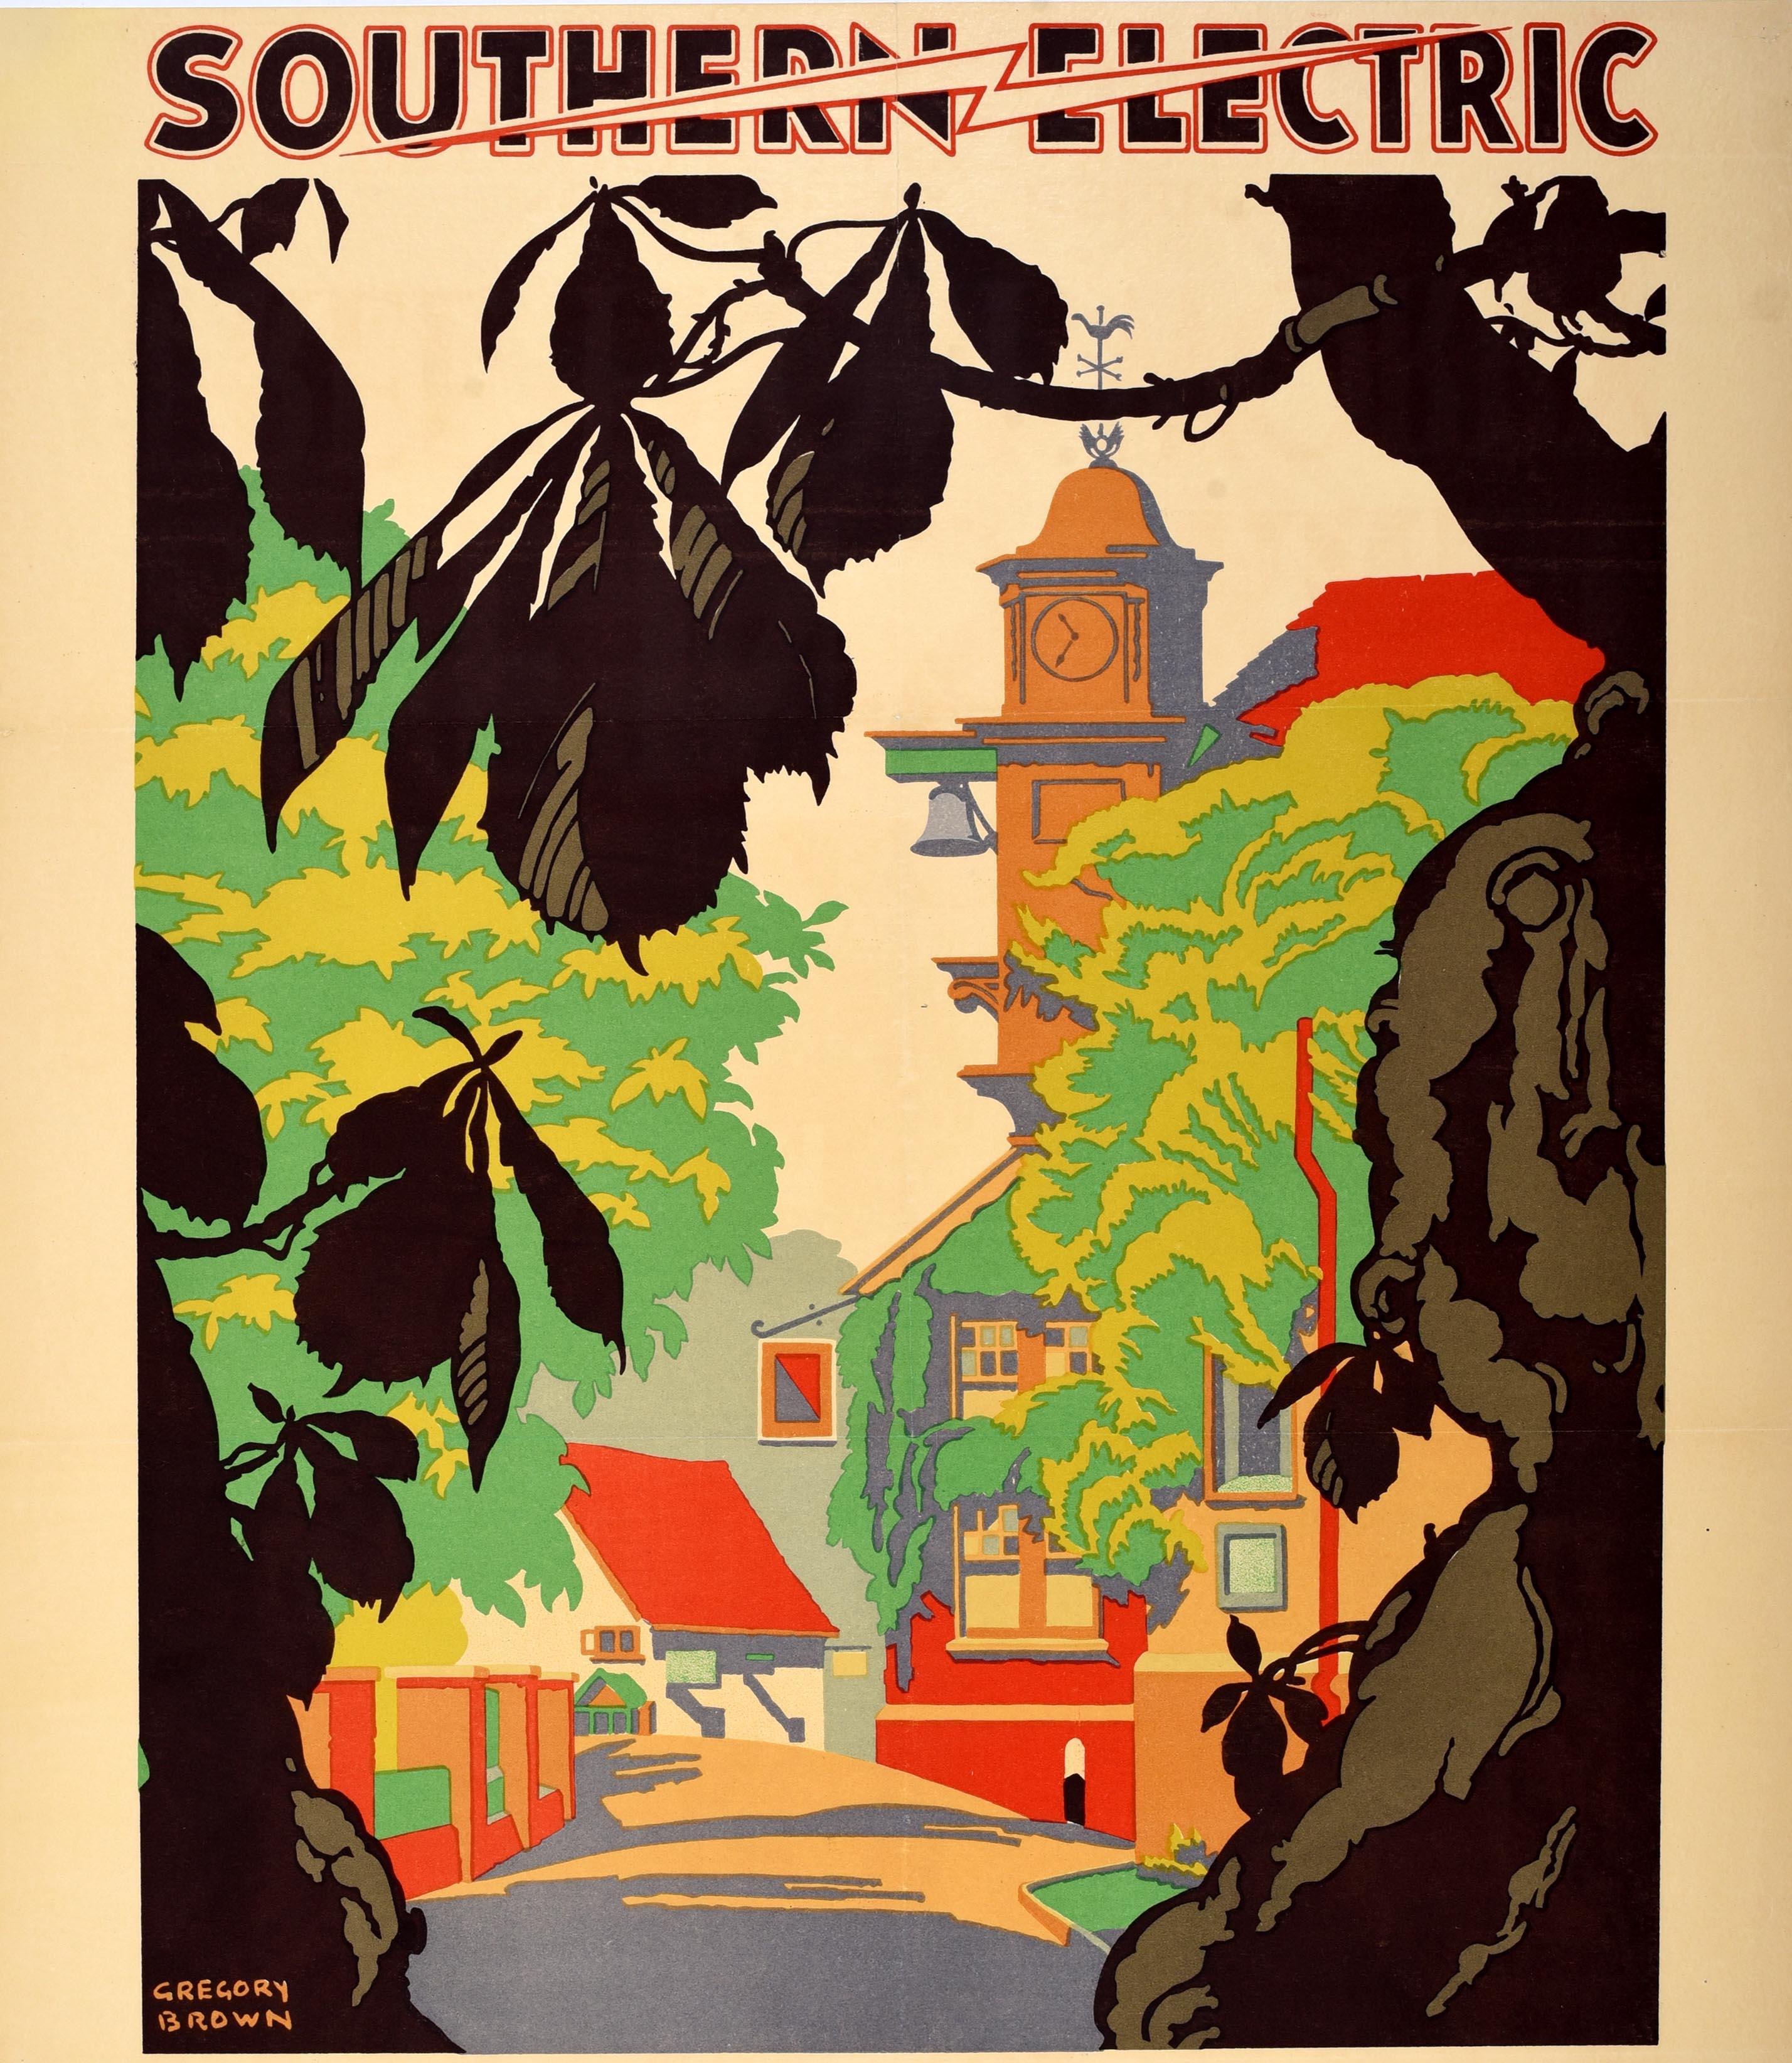 British Original Vintage Travel Poster Live In Surrey Free From Worry Southern Electric For Sale